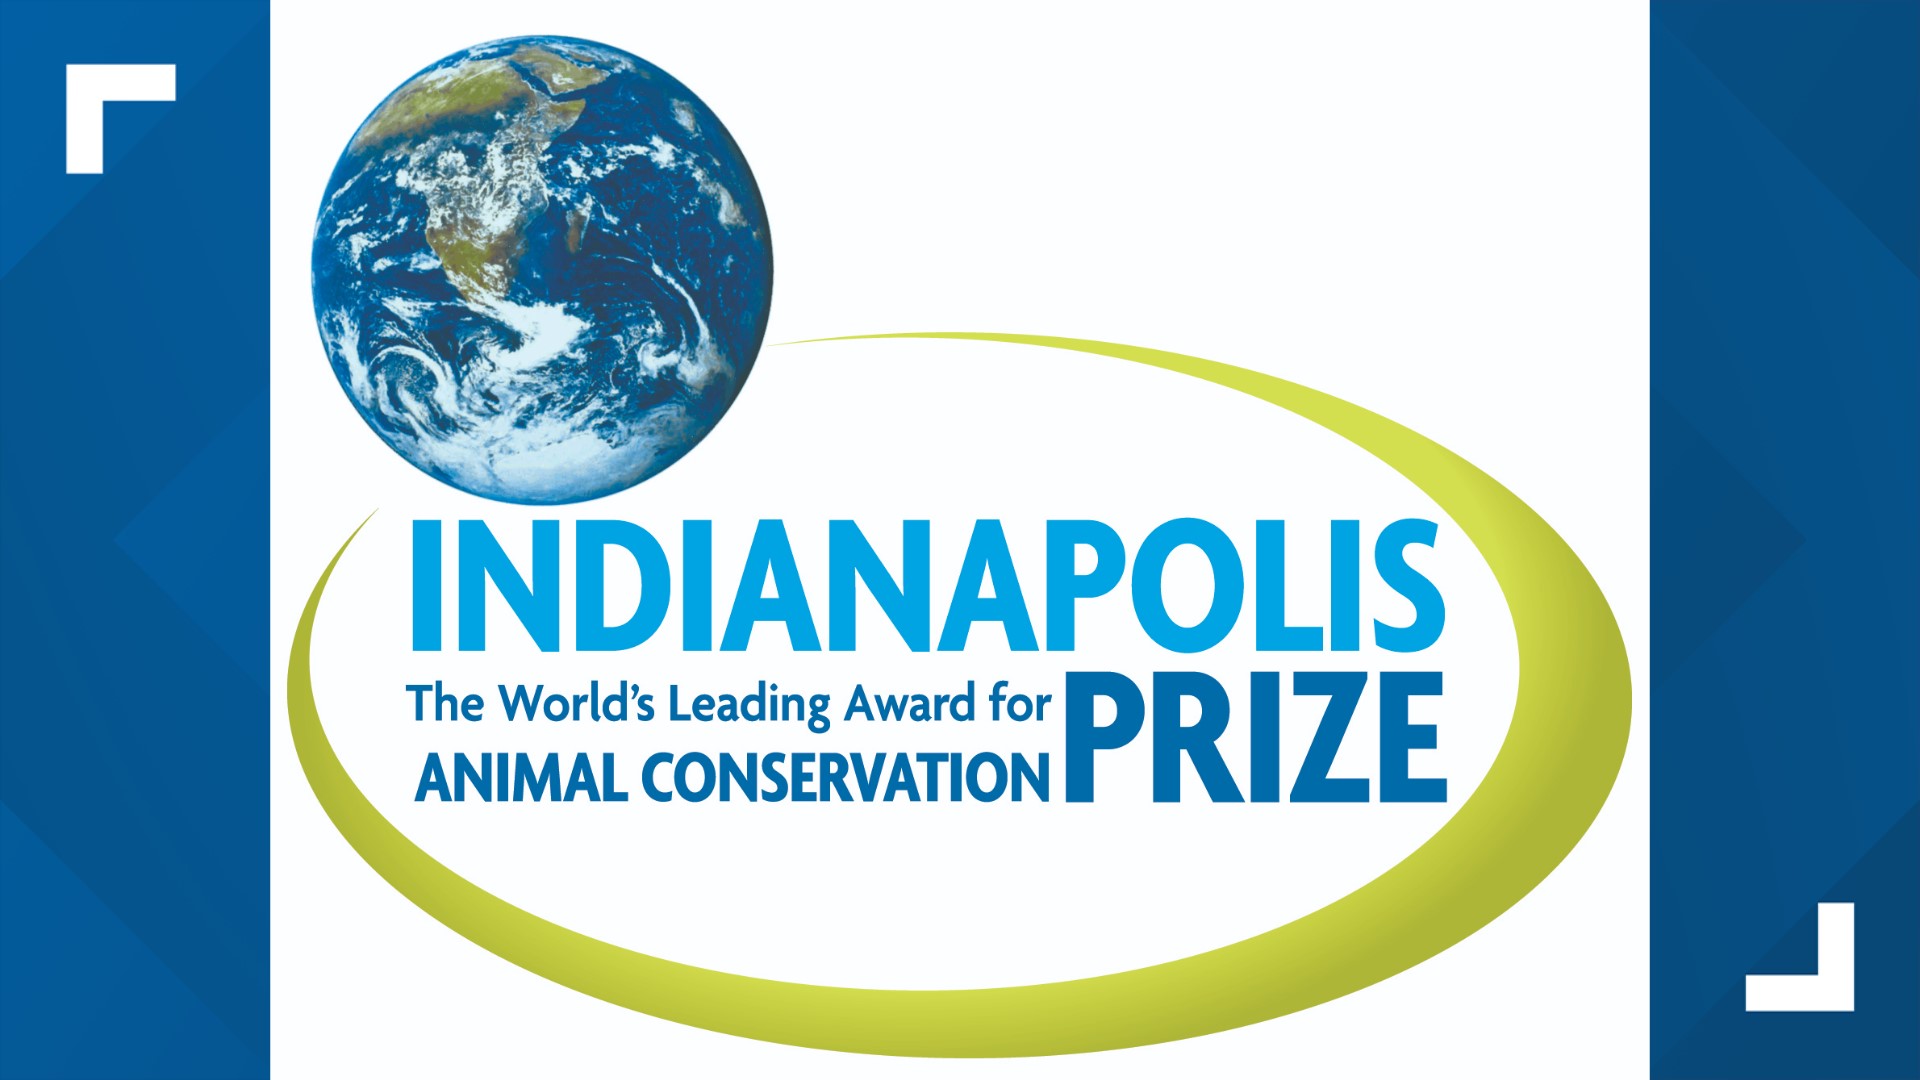 The award recognizes conservationists under 40 years of age "with the talent and drive to make a significant impact on saving an animal species or group of species."